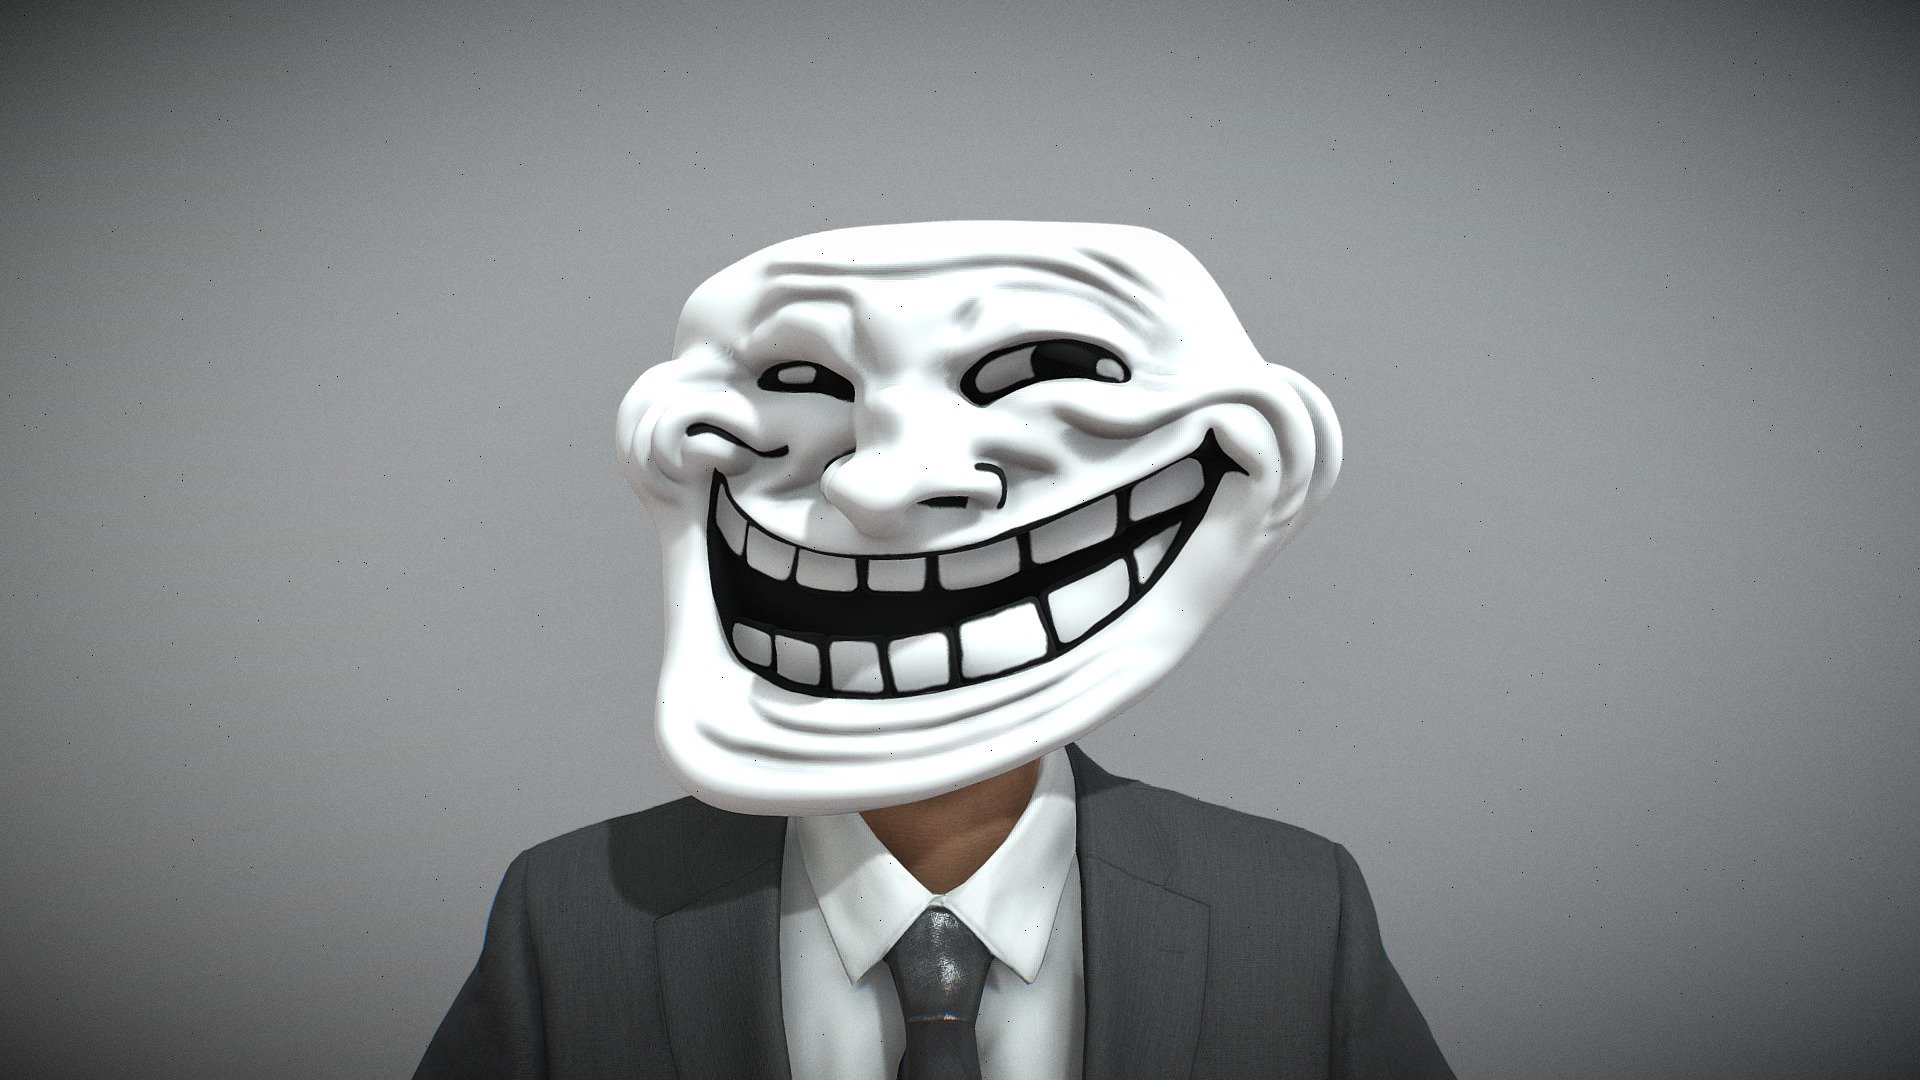 Trollface, also known as &ldquo;Coolface